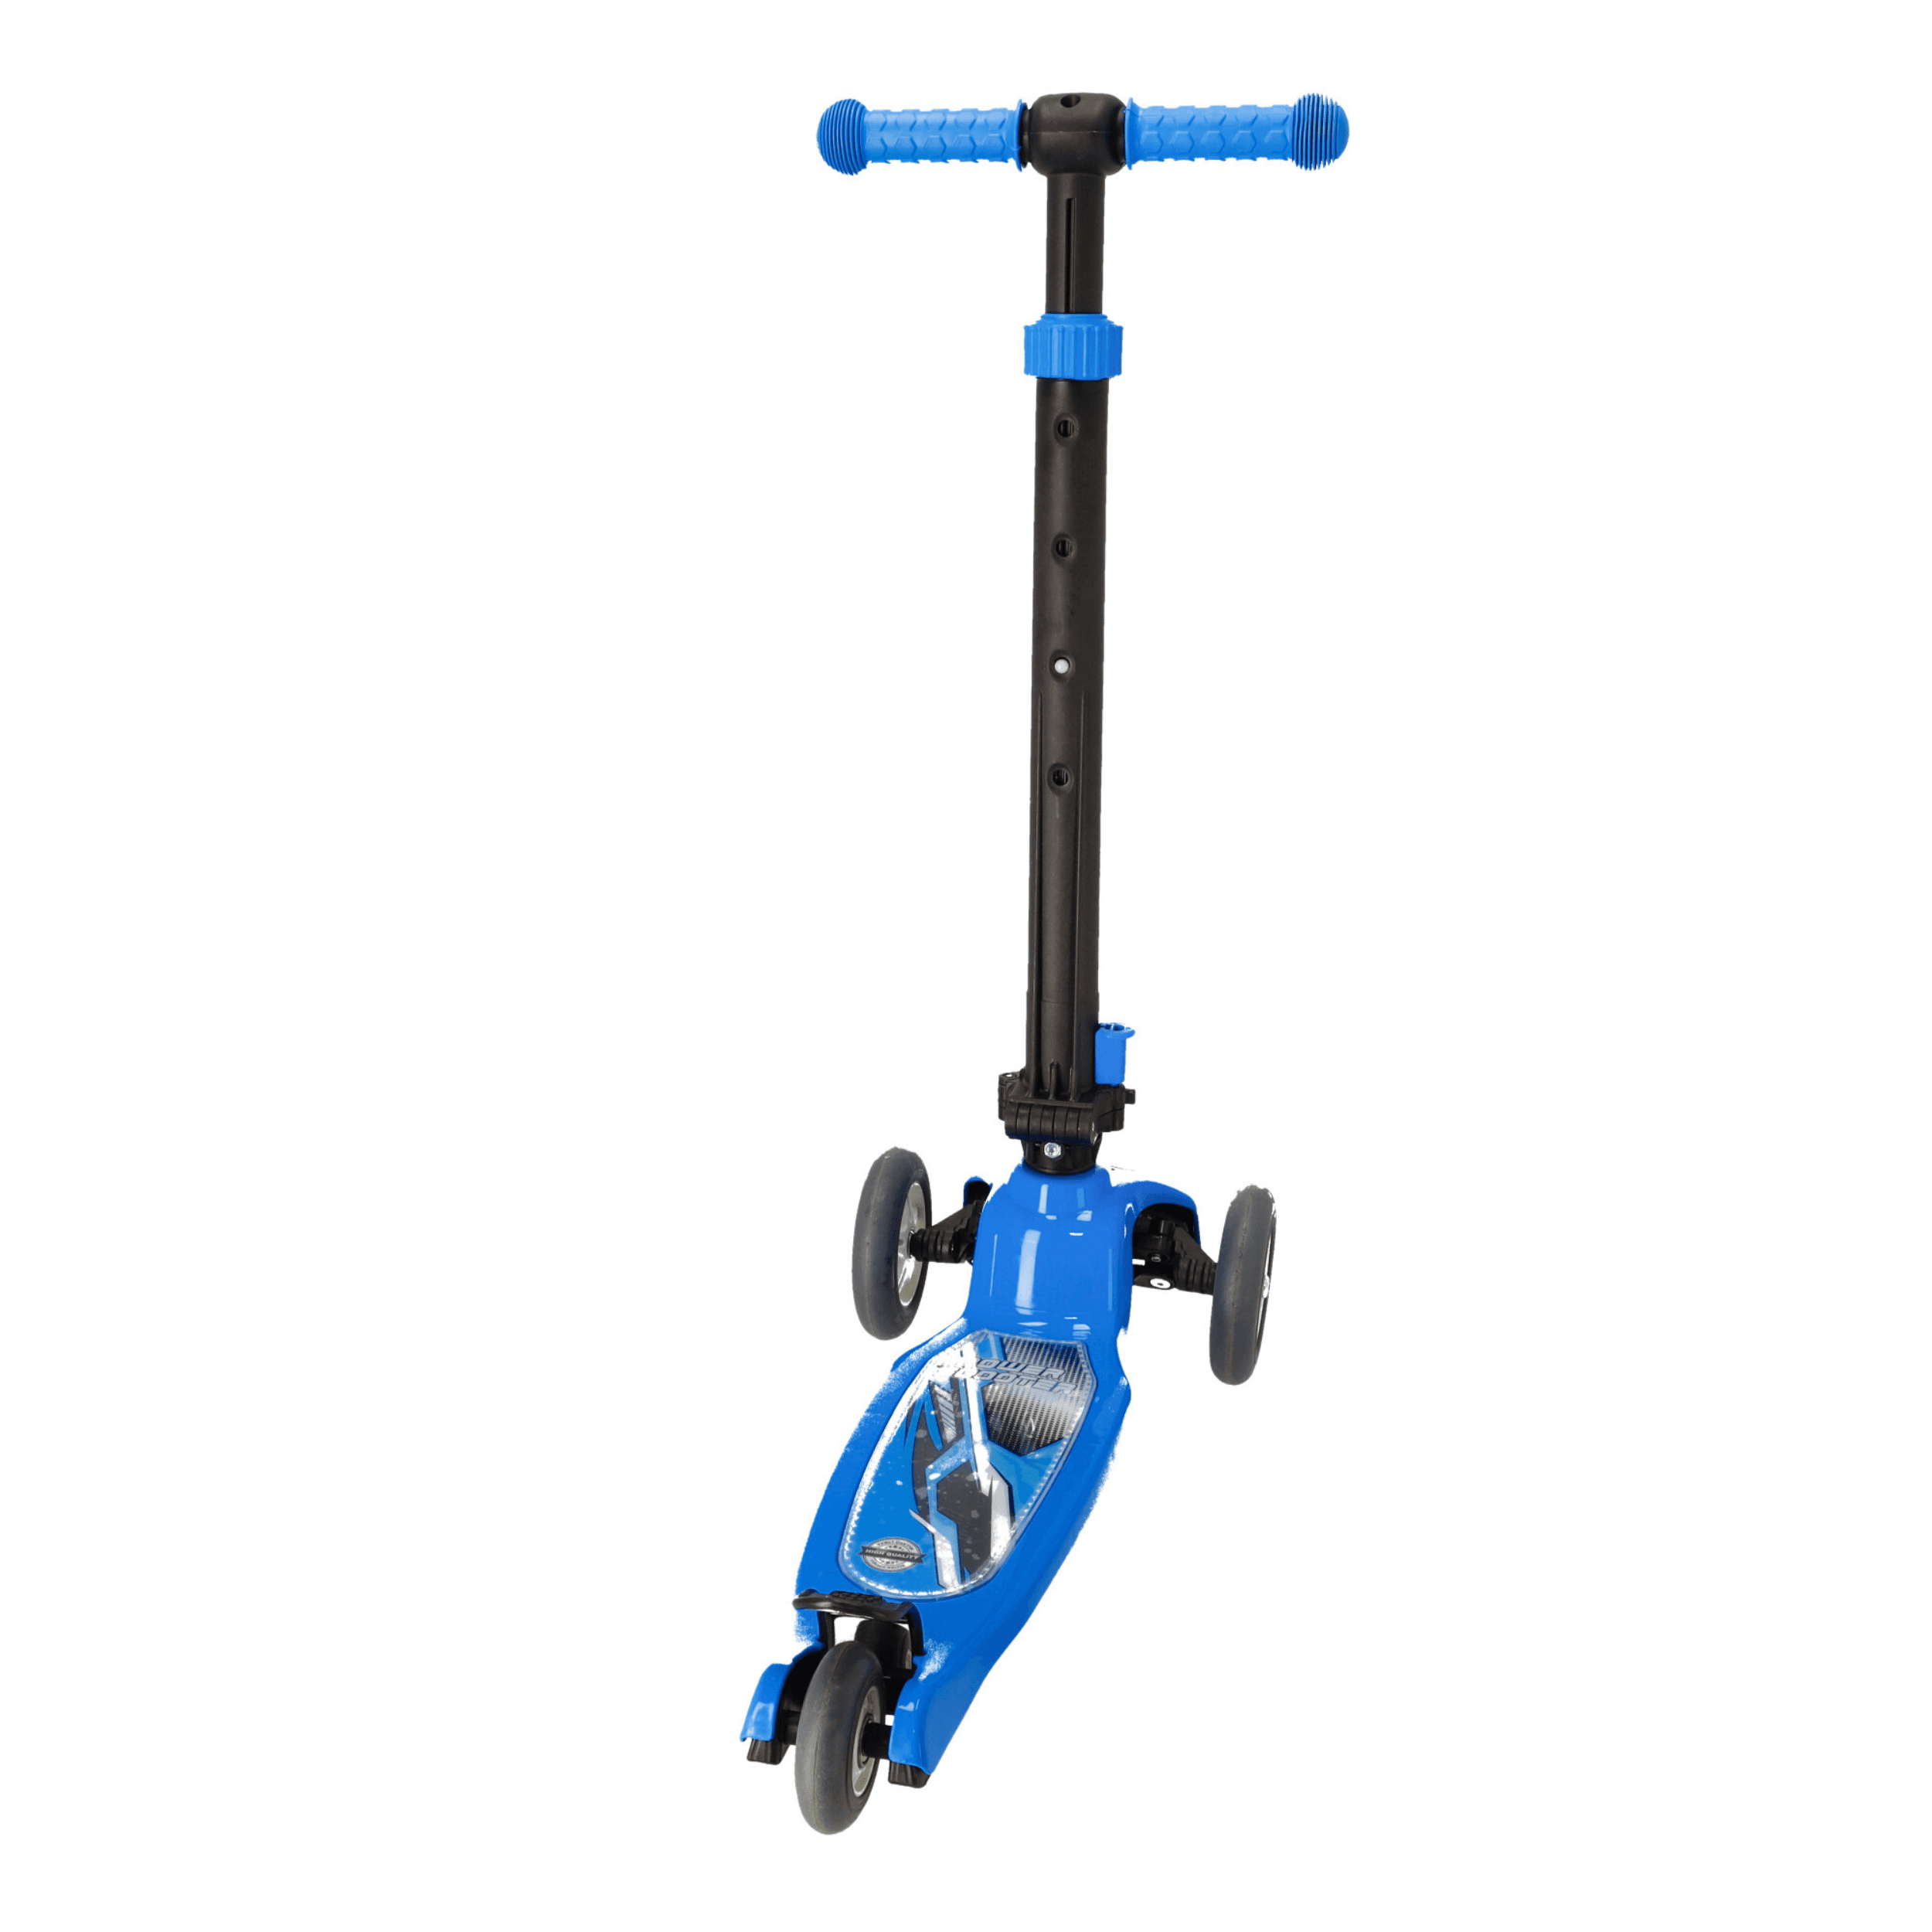 Pilsan LED Electric Scooter - blue